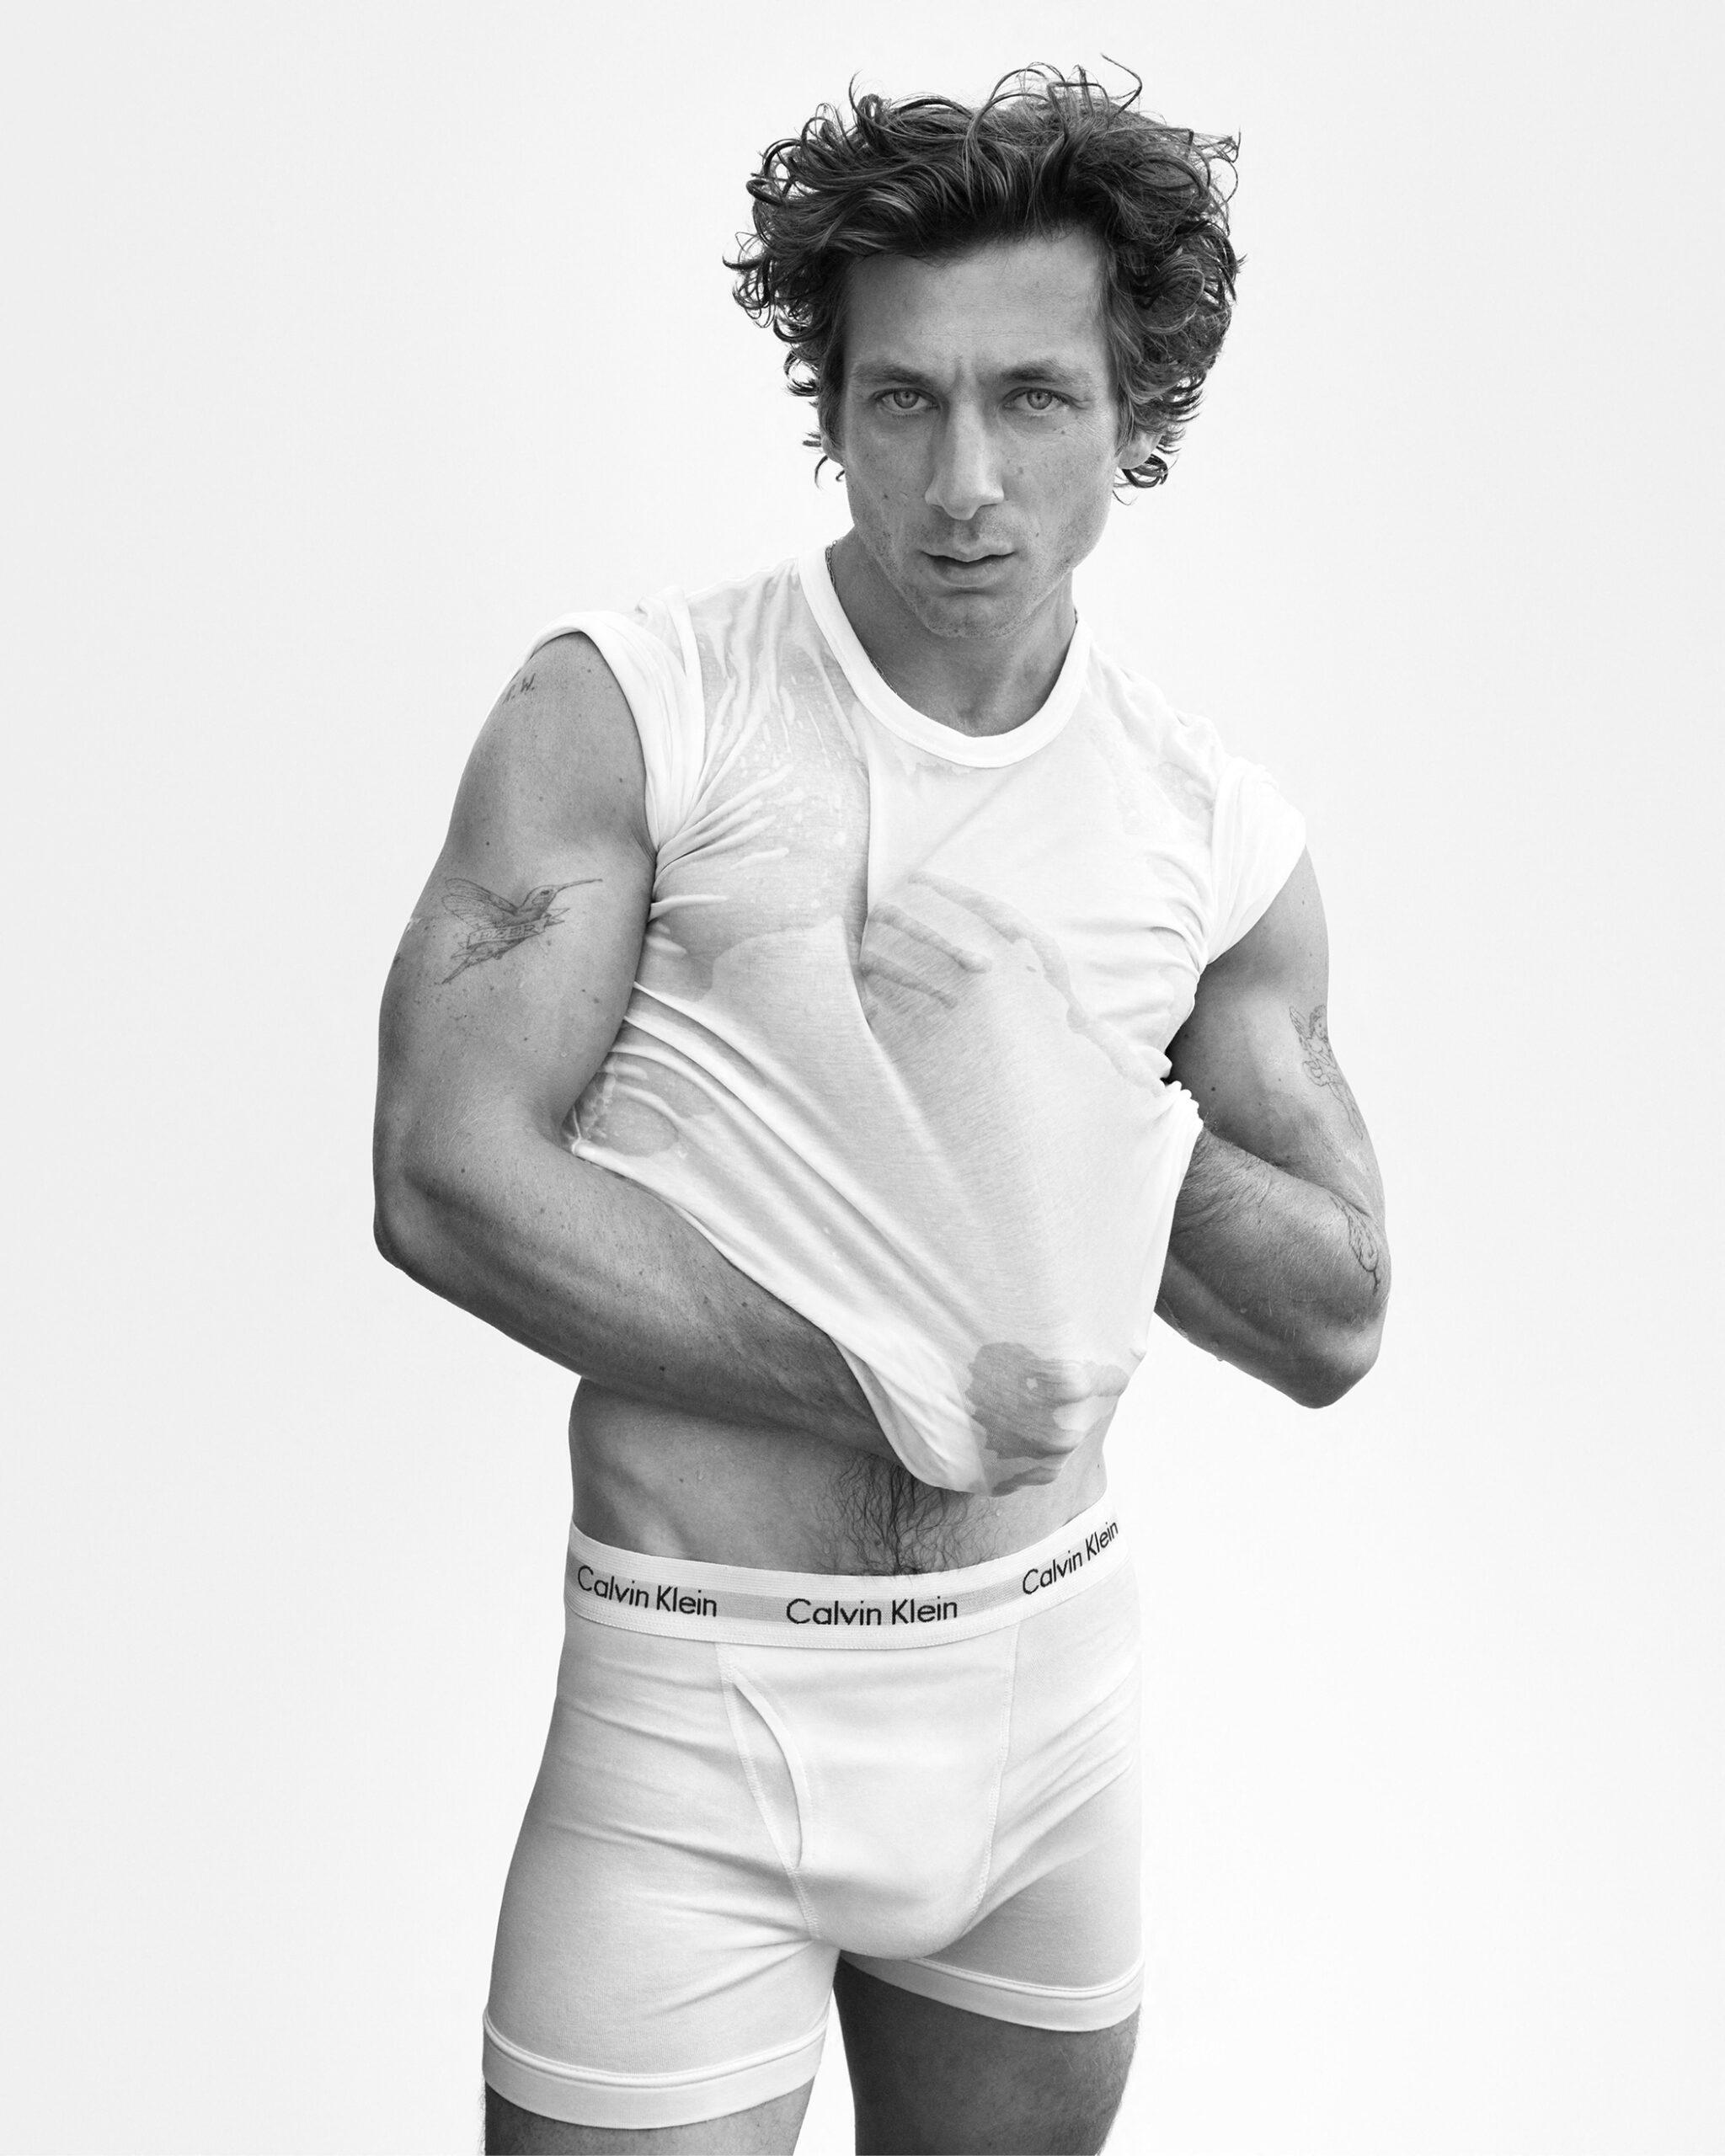 *MANDATORY CREDIT - Mert Alas/Calvin Klein/MEGA. Jeremy Allen White is hunky in Calvin Kleins as the iconic underwear brand's newest model. 'The Bear' star shows off his chiseled abs in these striking images showing the collaboration, and shot by Mert Alas. The Brooklyn-born 32-year-old launched his partnership with the set of steamy photos wearing the brand's signature white briefs and revealing his shredded physique. A native New Yorker, he was shot in his hometown in a series of stills and videos that the brand aims to "showcase his connection to the city and amplify his empowered energy in its most iconic styles". The Spring 2024 men?s Underwear collection refreshes classic Calvin Klein designs with new logo treatments and materials for stylish, everyday comfort. New Intense Power, Micro Stretch and Micro Mesh styles are aimed to marry bold design with innovative fabrication for sleek and comfortable looks, while essential Modern Cotton and Cotton Stretch underwear are designed to provide an iconic base to every wardrobe. Across the Spring 2024 collection, Calvin Klein?s minimalist essentials are said to be presented with "modern innovation and sensuality in its purest form". *MANDATORY CREDIT - Mert Alas/Calvin Klein/MEGA. 04 Jan 2024 Pictured: Jeremy Allen White. Photo credit: Mert Alas/Calvin Klein/MEGA TheMegaAgency.com +1 888 505 6342 (Mega Agency TagID: MEGA1078355_002.jpg) [Photo via Mega Agency]